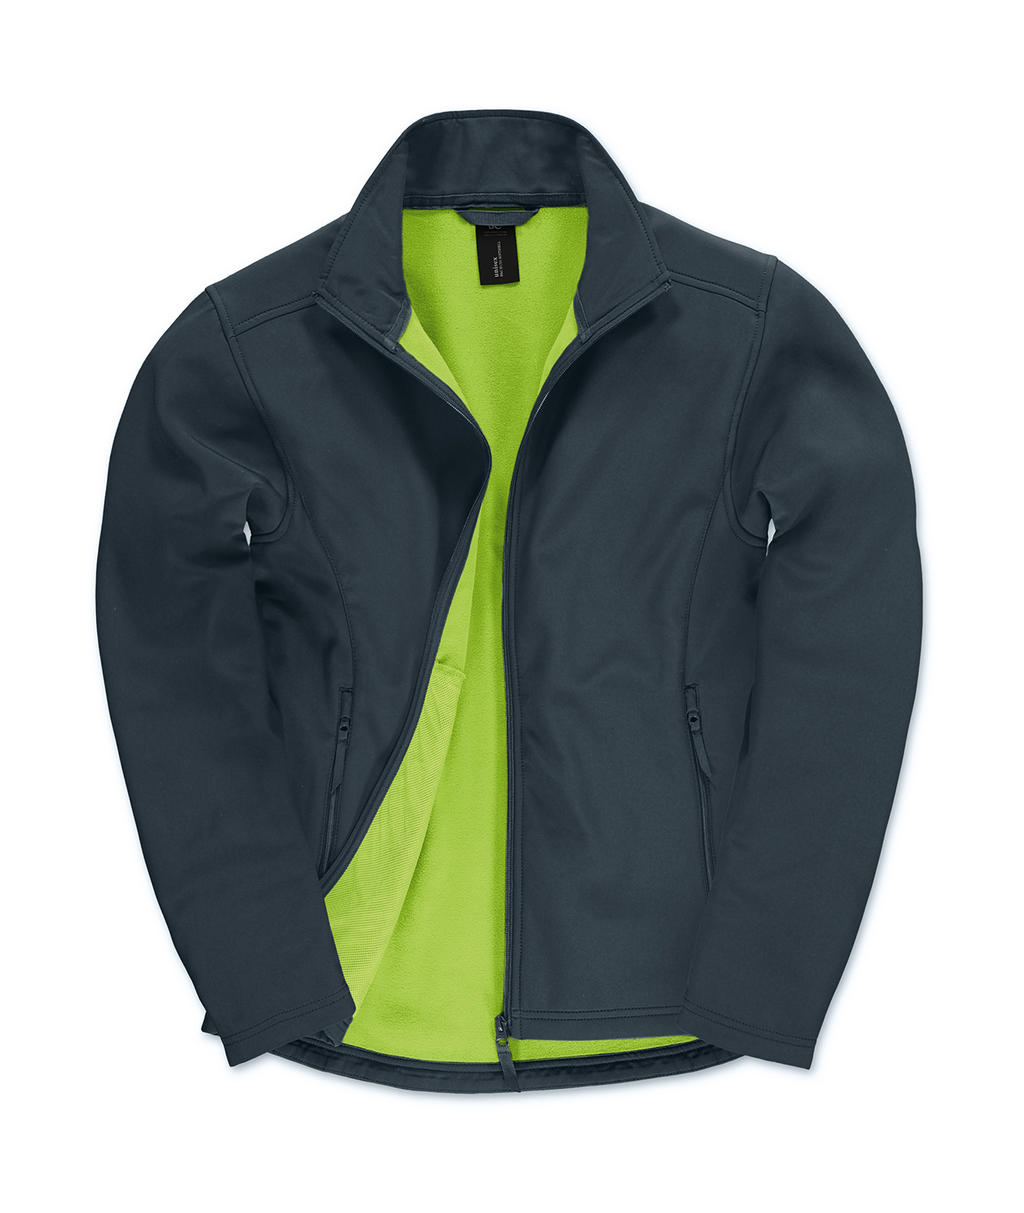  ID.701 Softshell Jacket in Farbe Navy/Neon Green